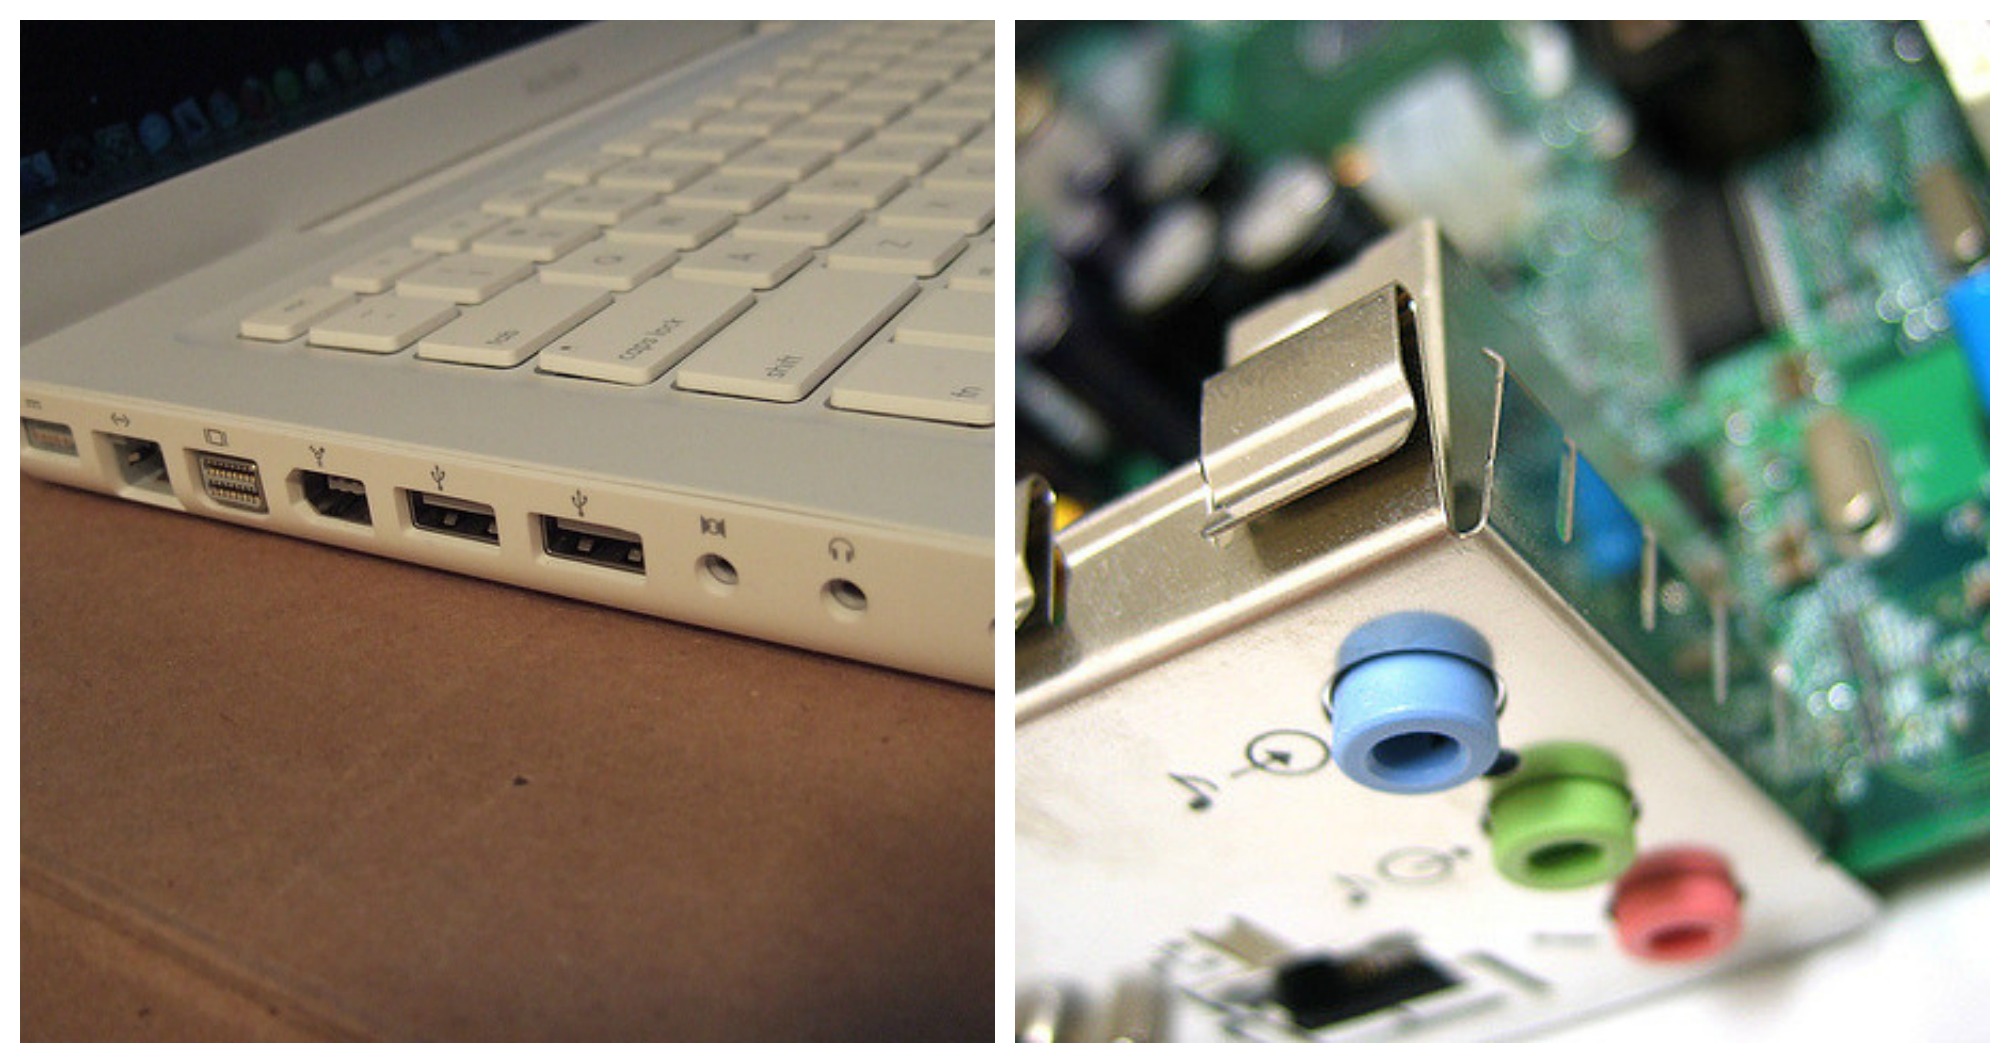 Audio Ports on an Apple Macbook and a disassembled PC